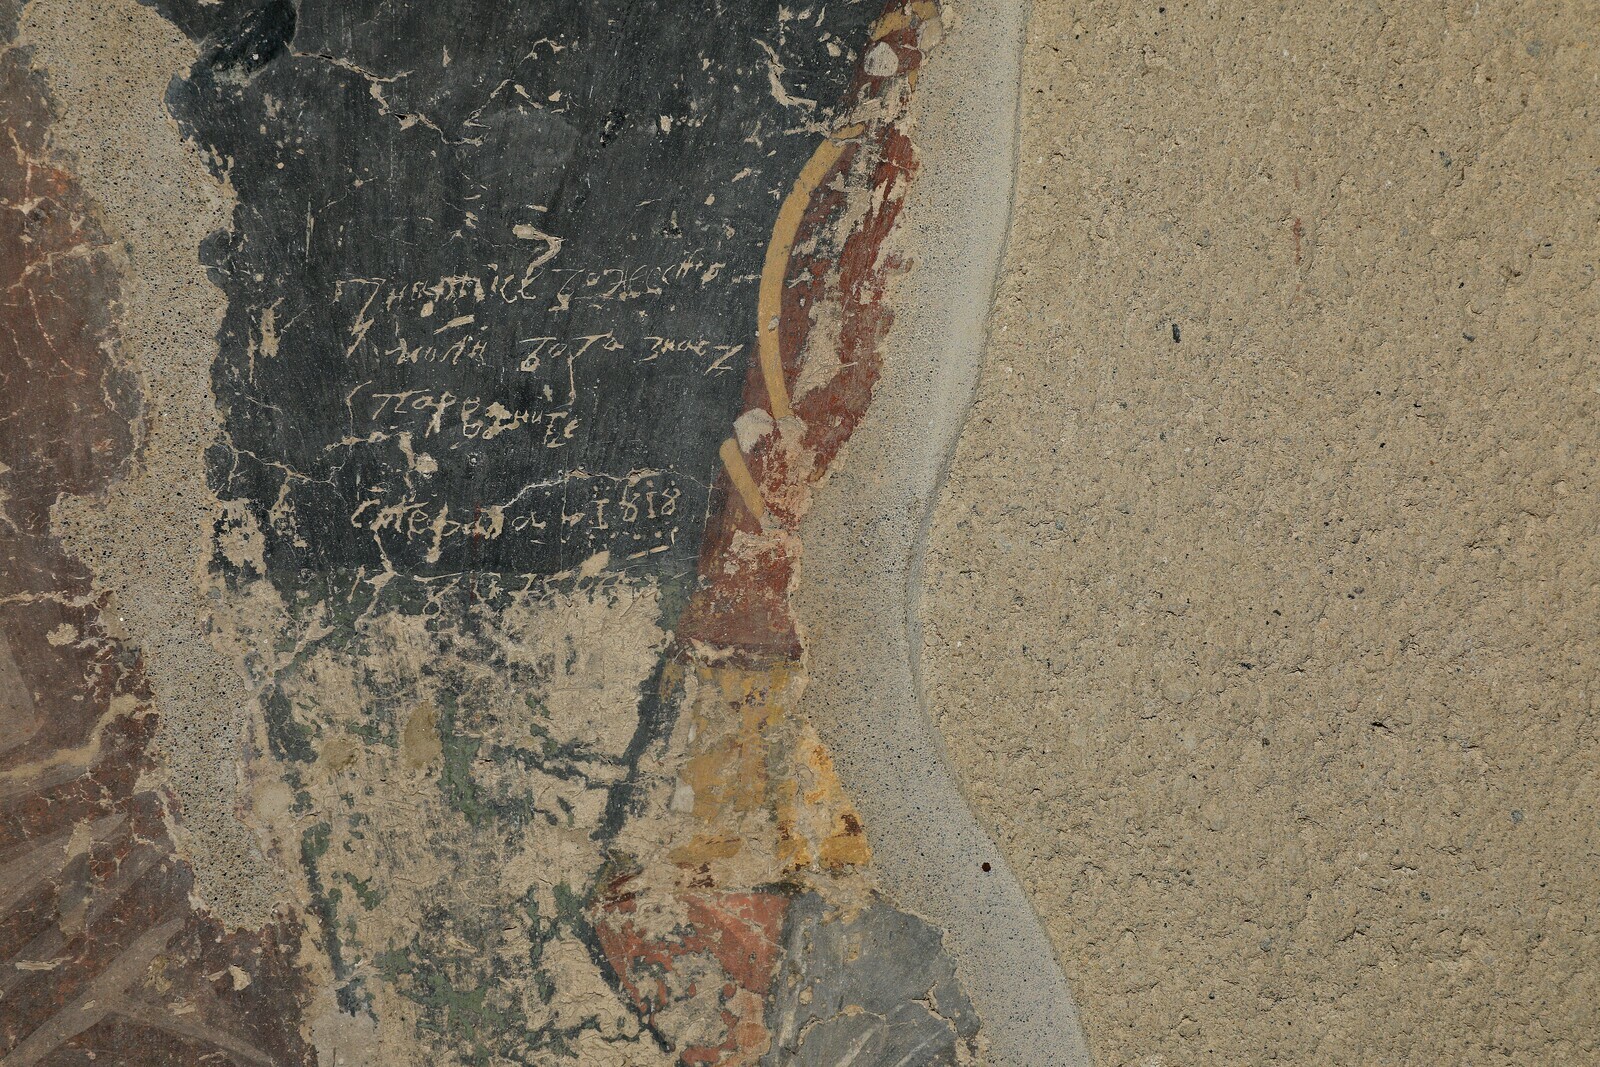 South Section of the Rulers' Composition, detail